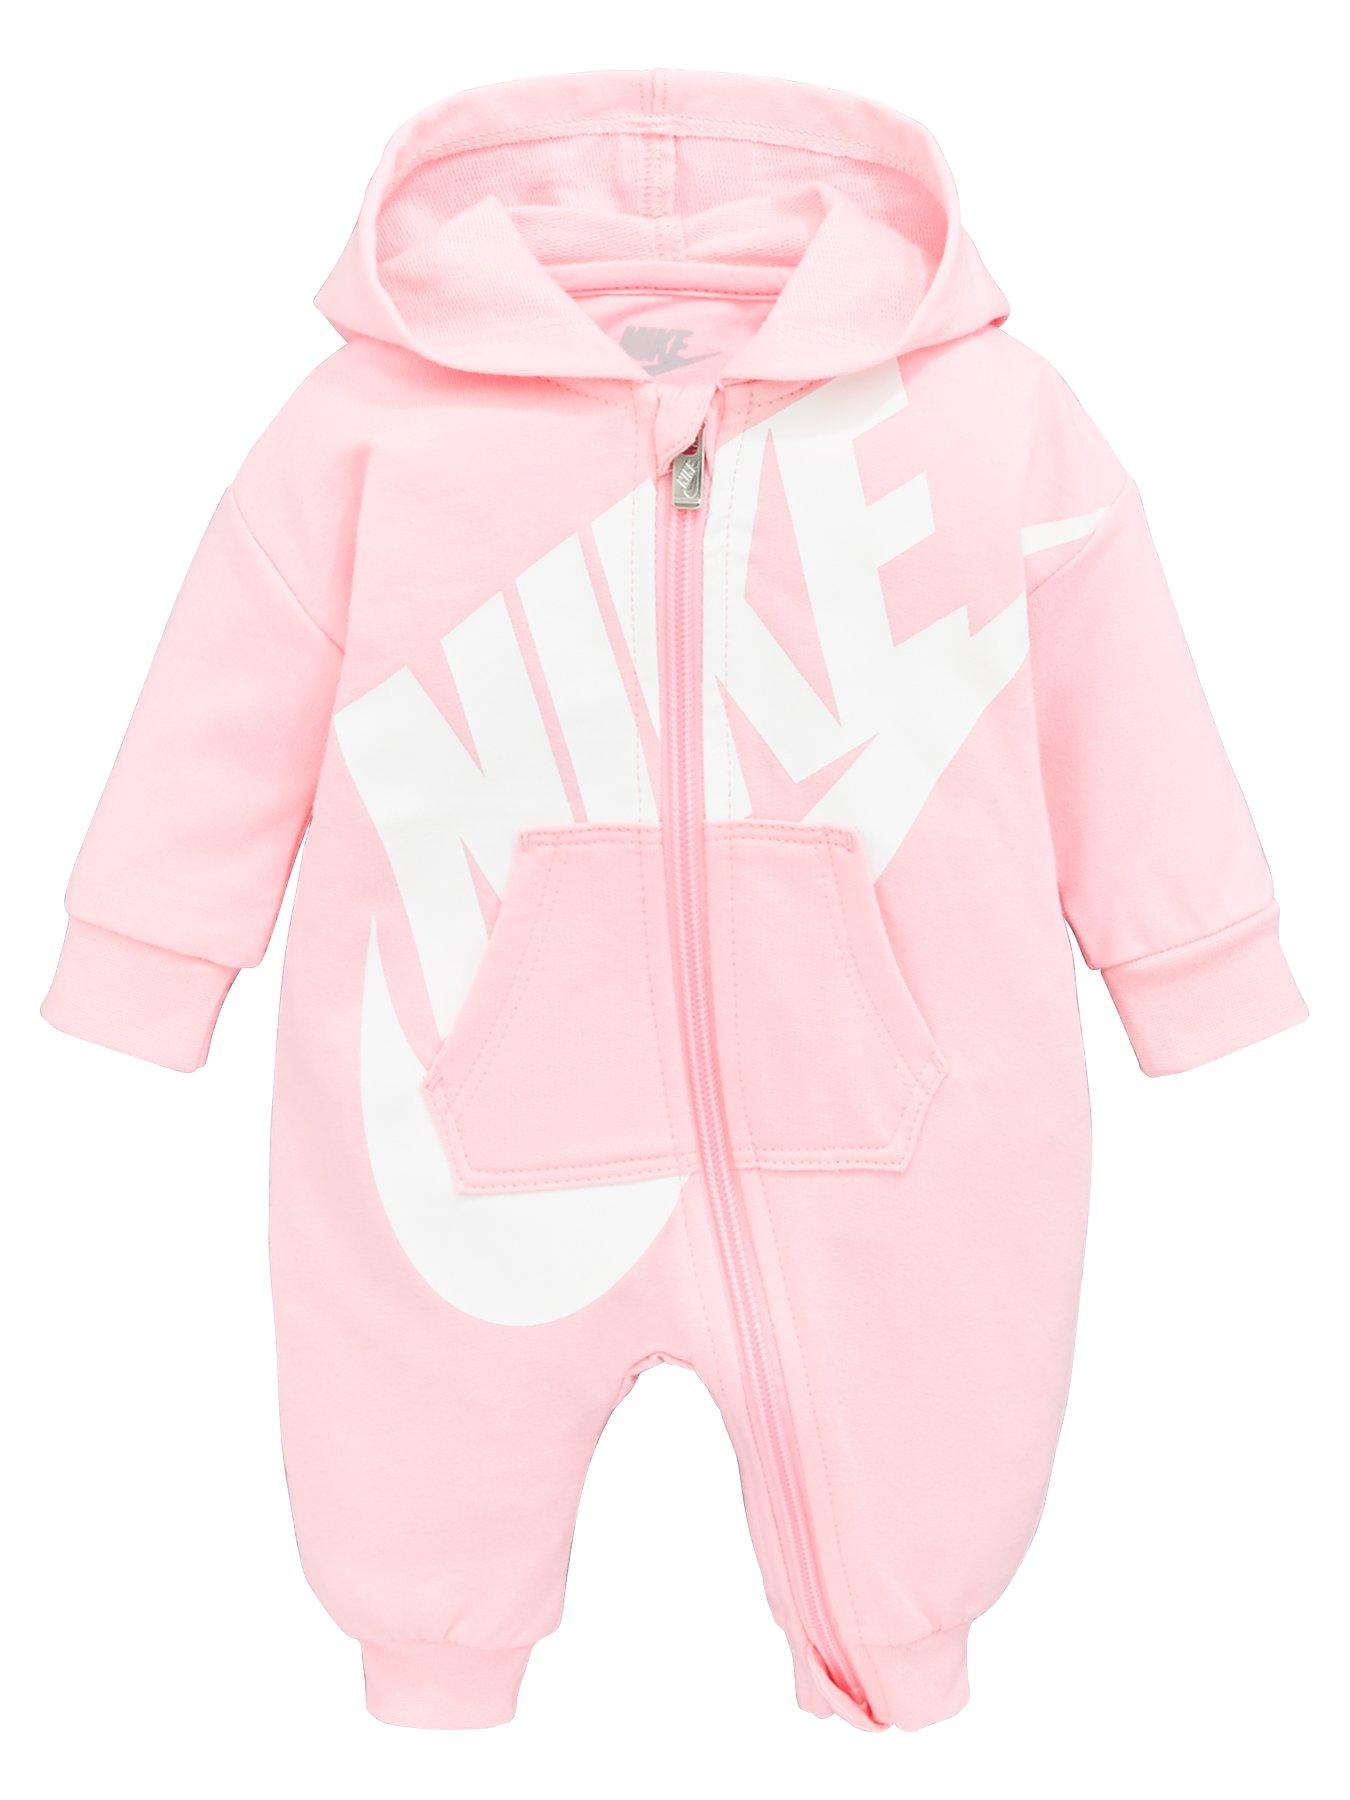 nike infant girl clothes